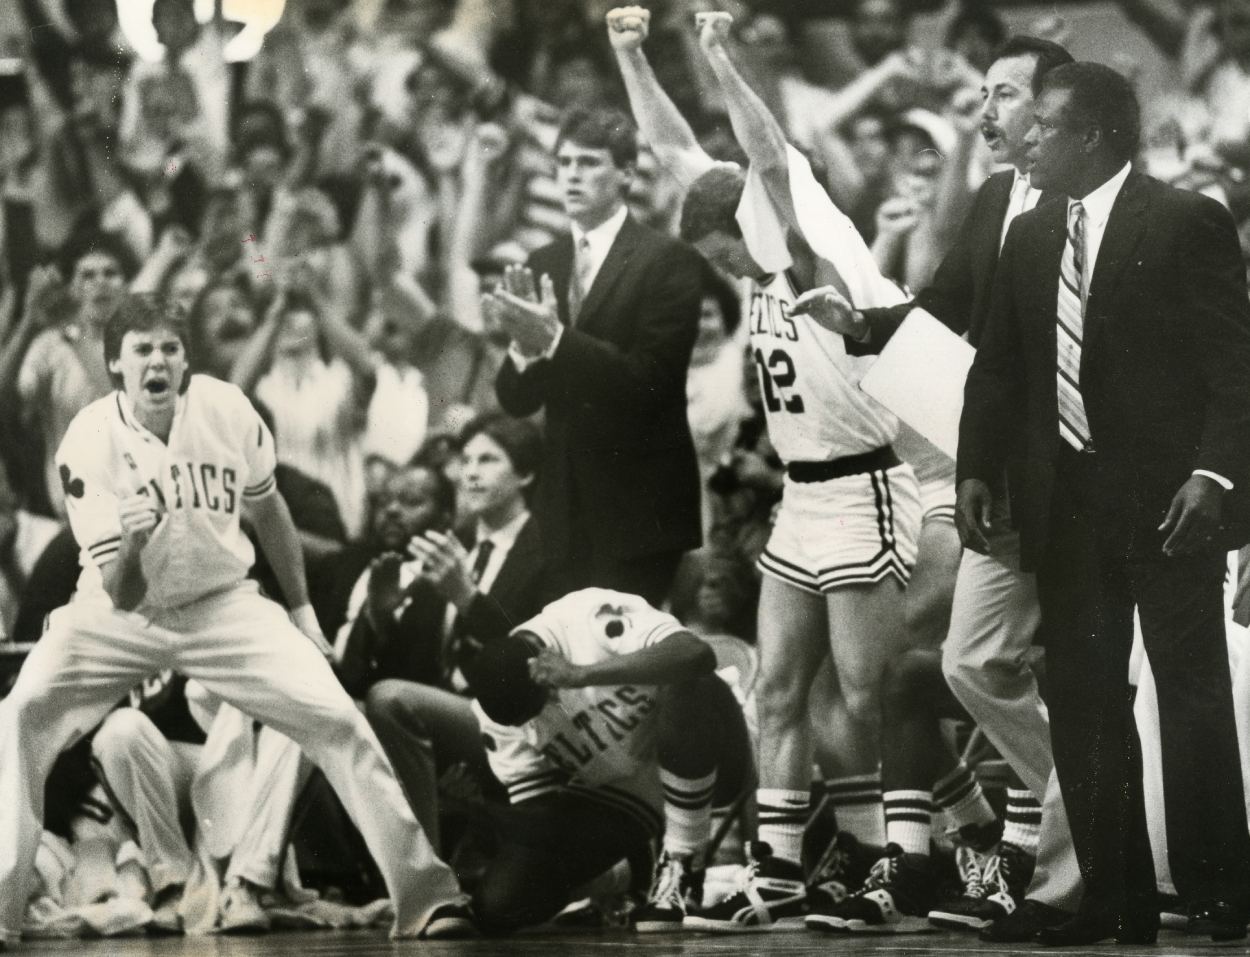 The Boston Celtics bench reacts to final Celtics points as Larry Bird steals the ball and passes to Dennis Johnson for the winning basket against the Detroit Pistons in 1987.